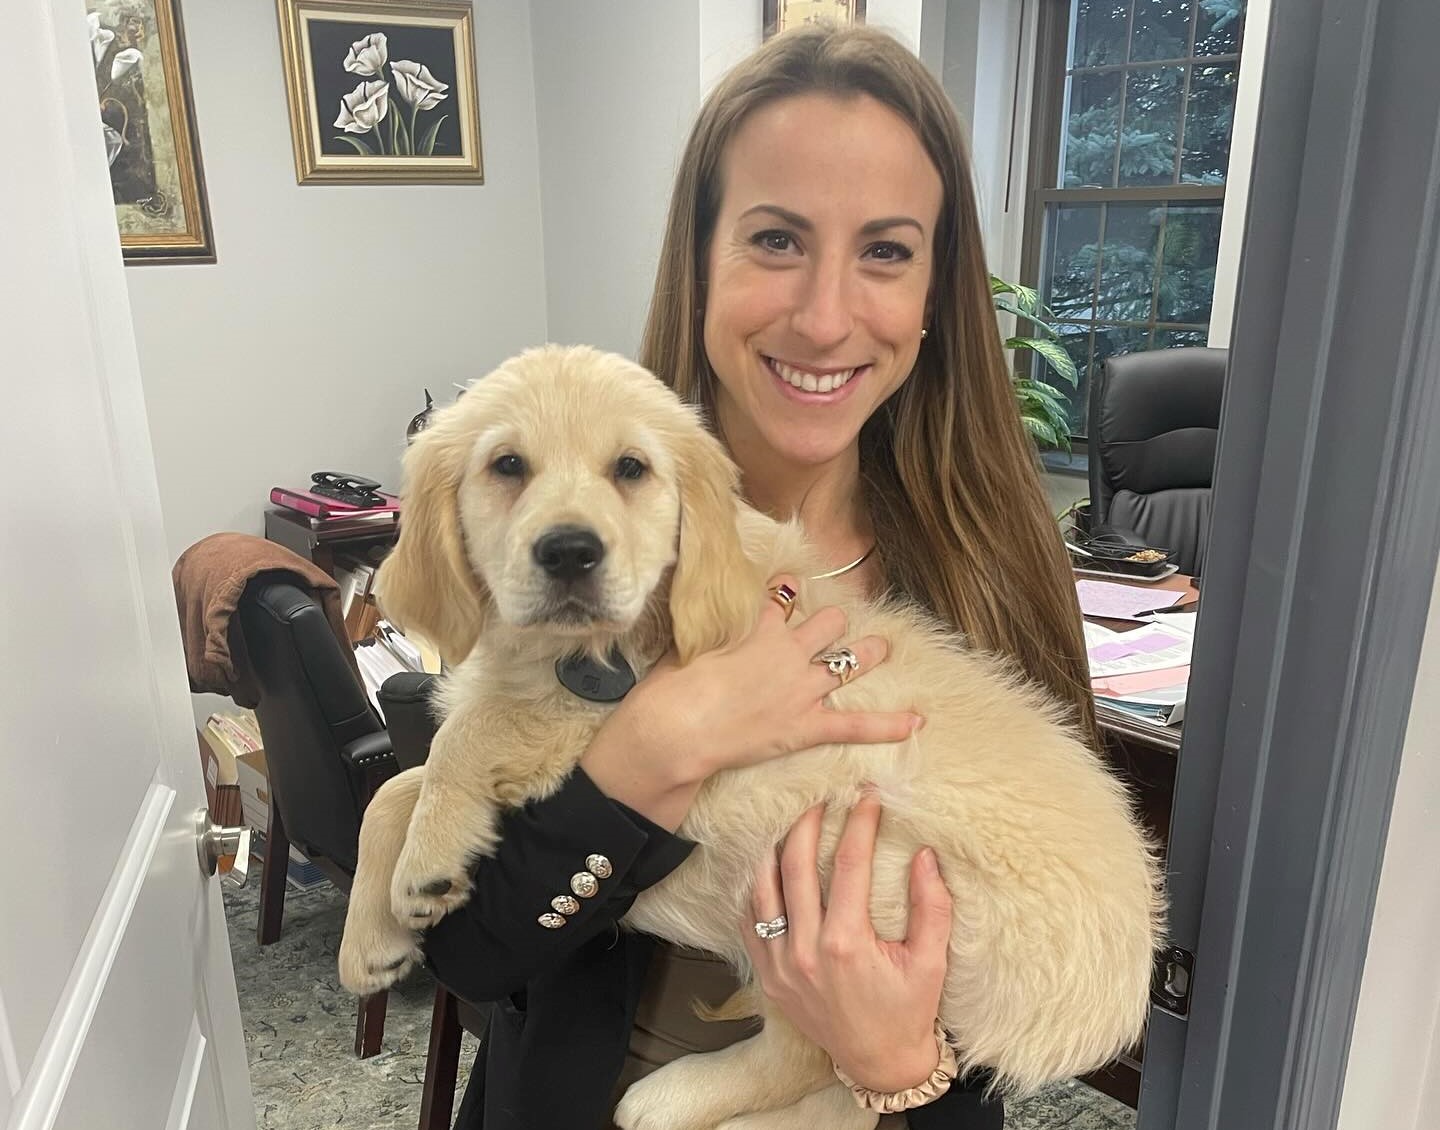 michael kuldiner law office's loretta golding attorney holding a puppy